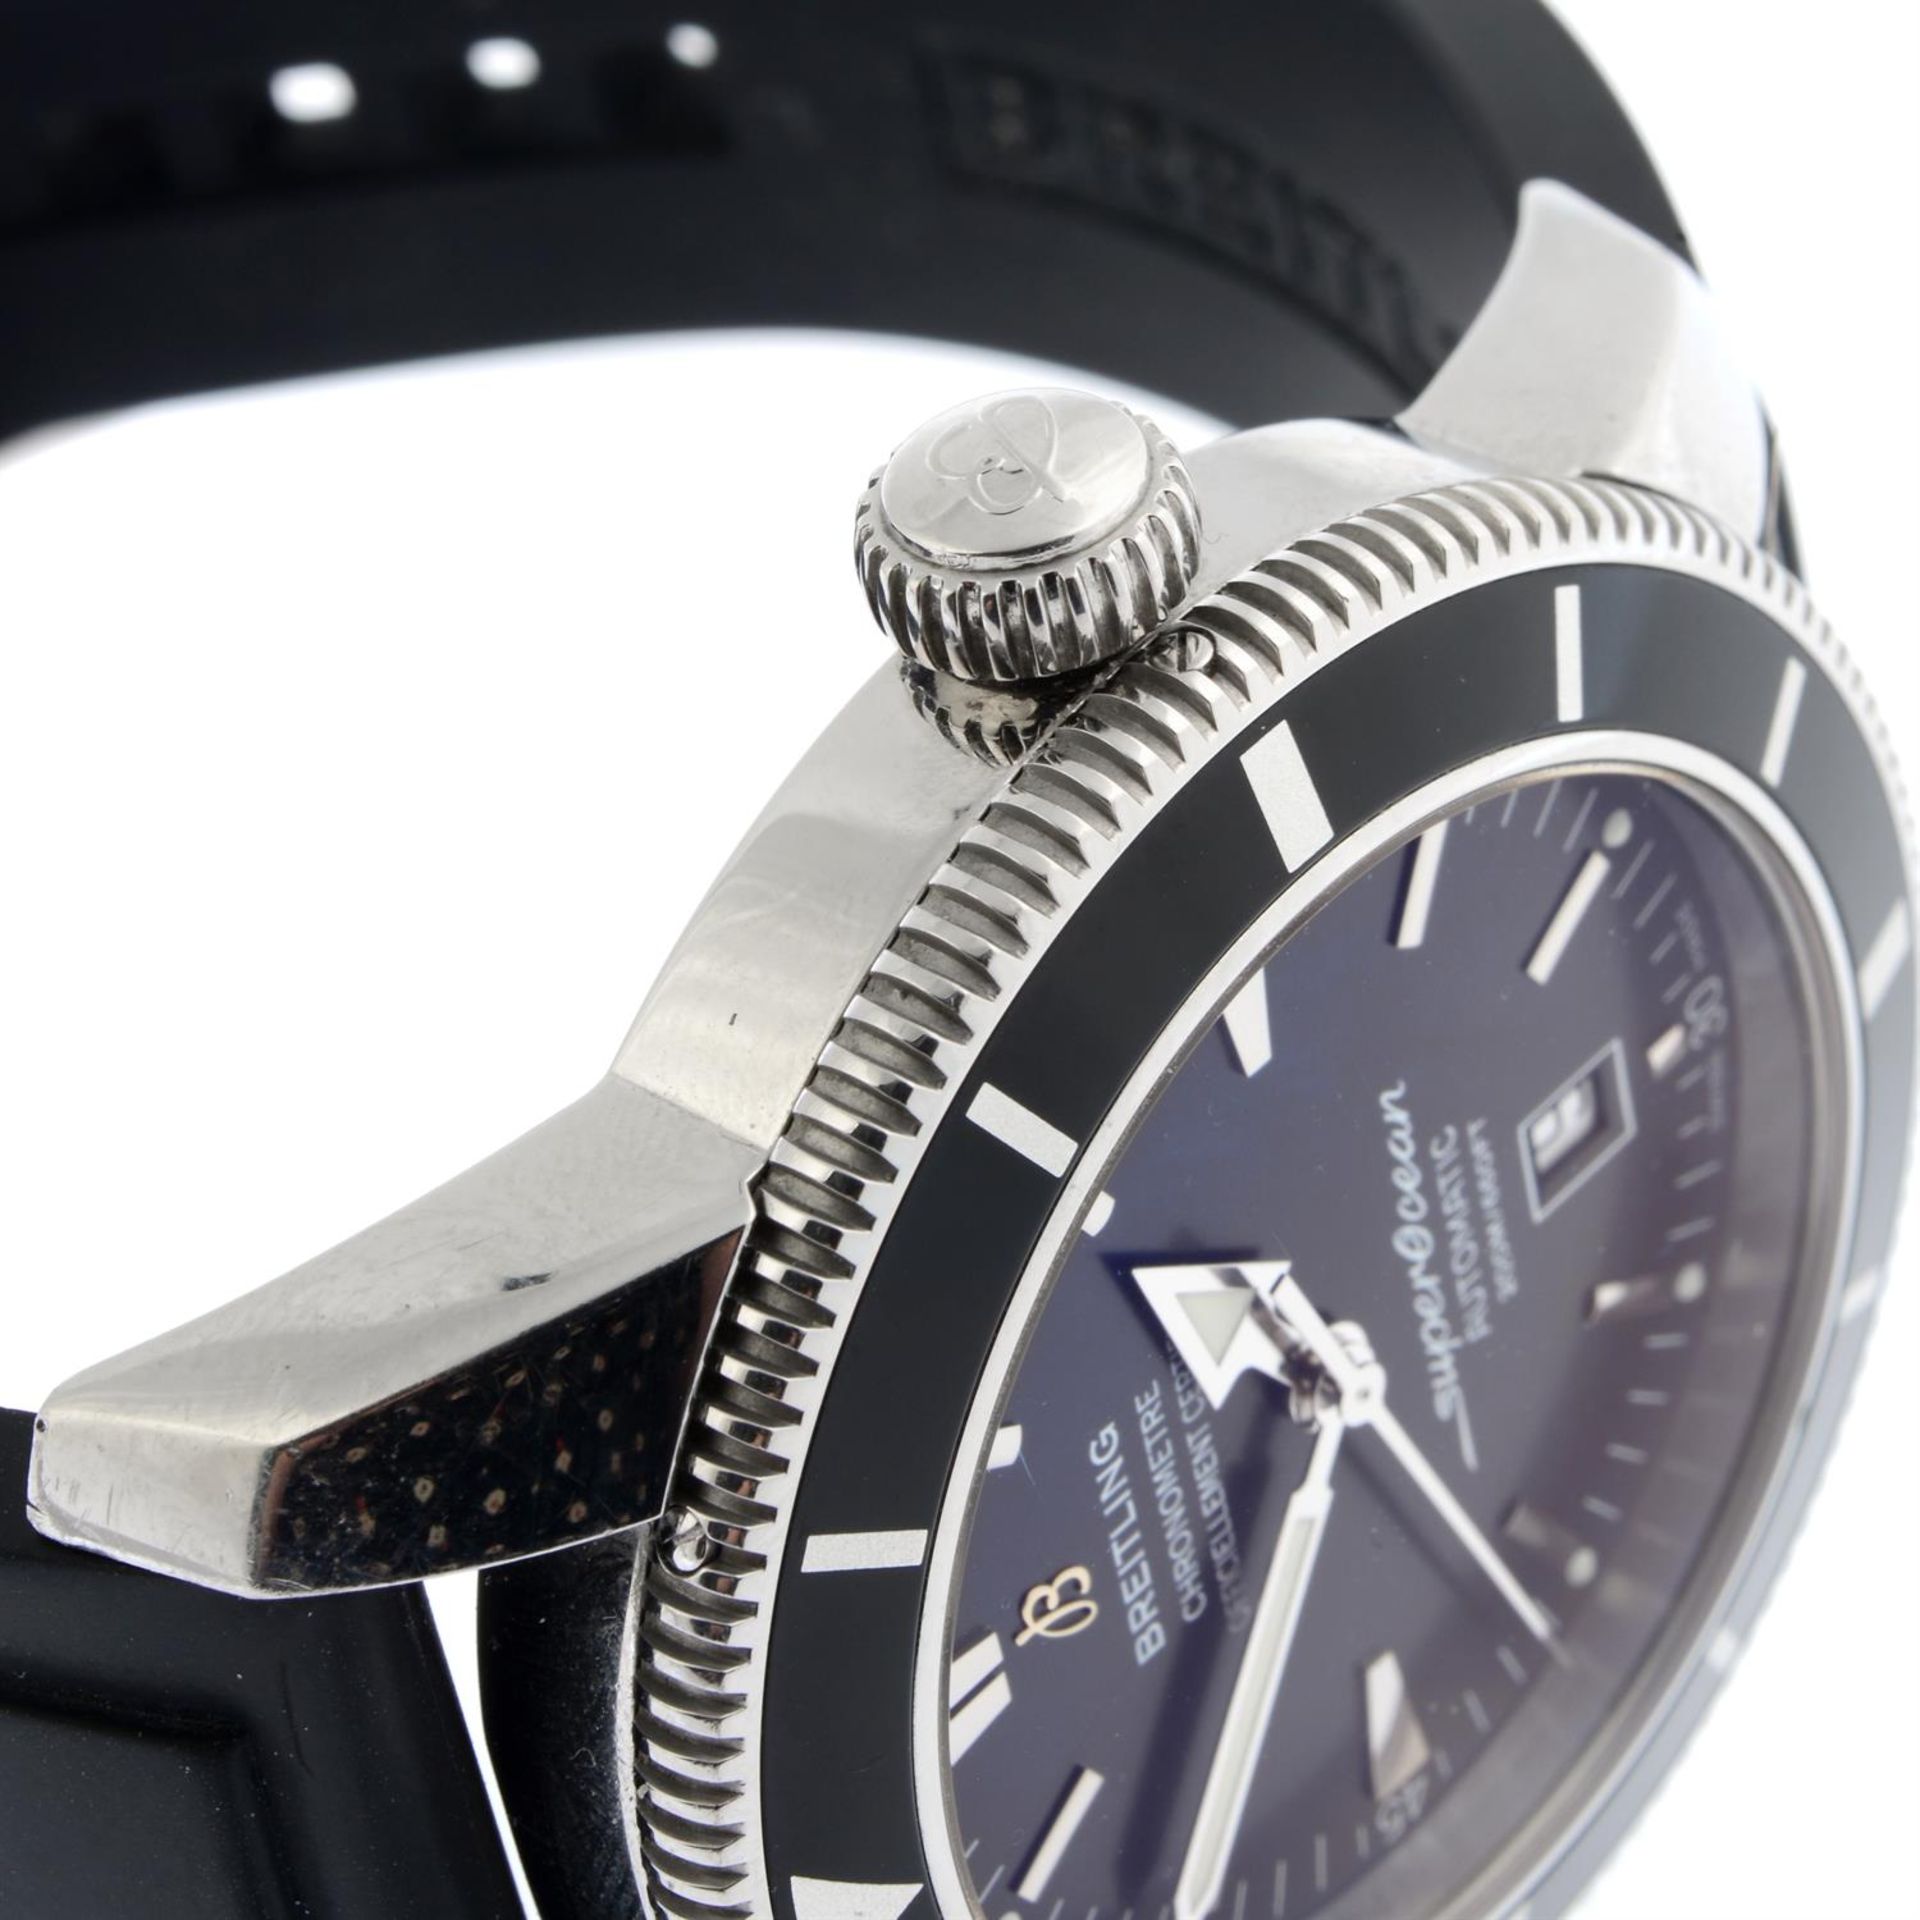 BREITLING - a limited edition stainless steel SuperOcean Heritage "Humint Unit" wrist watch, 46mm. - Image 4 of 6